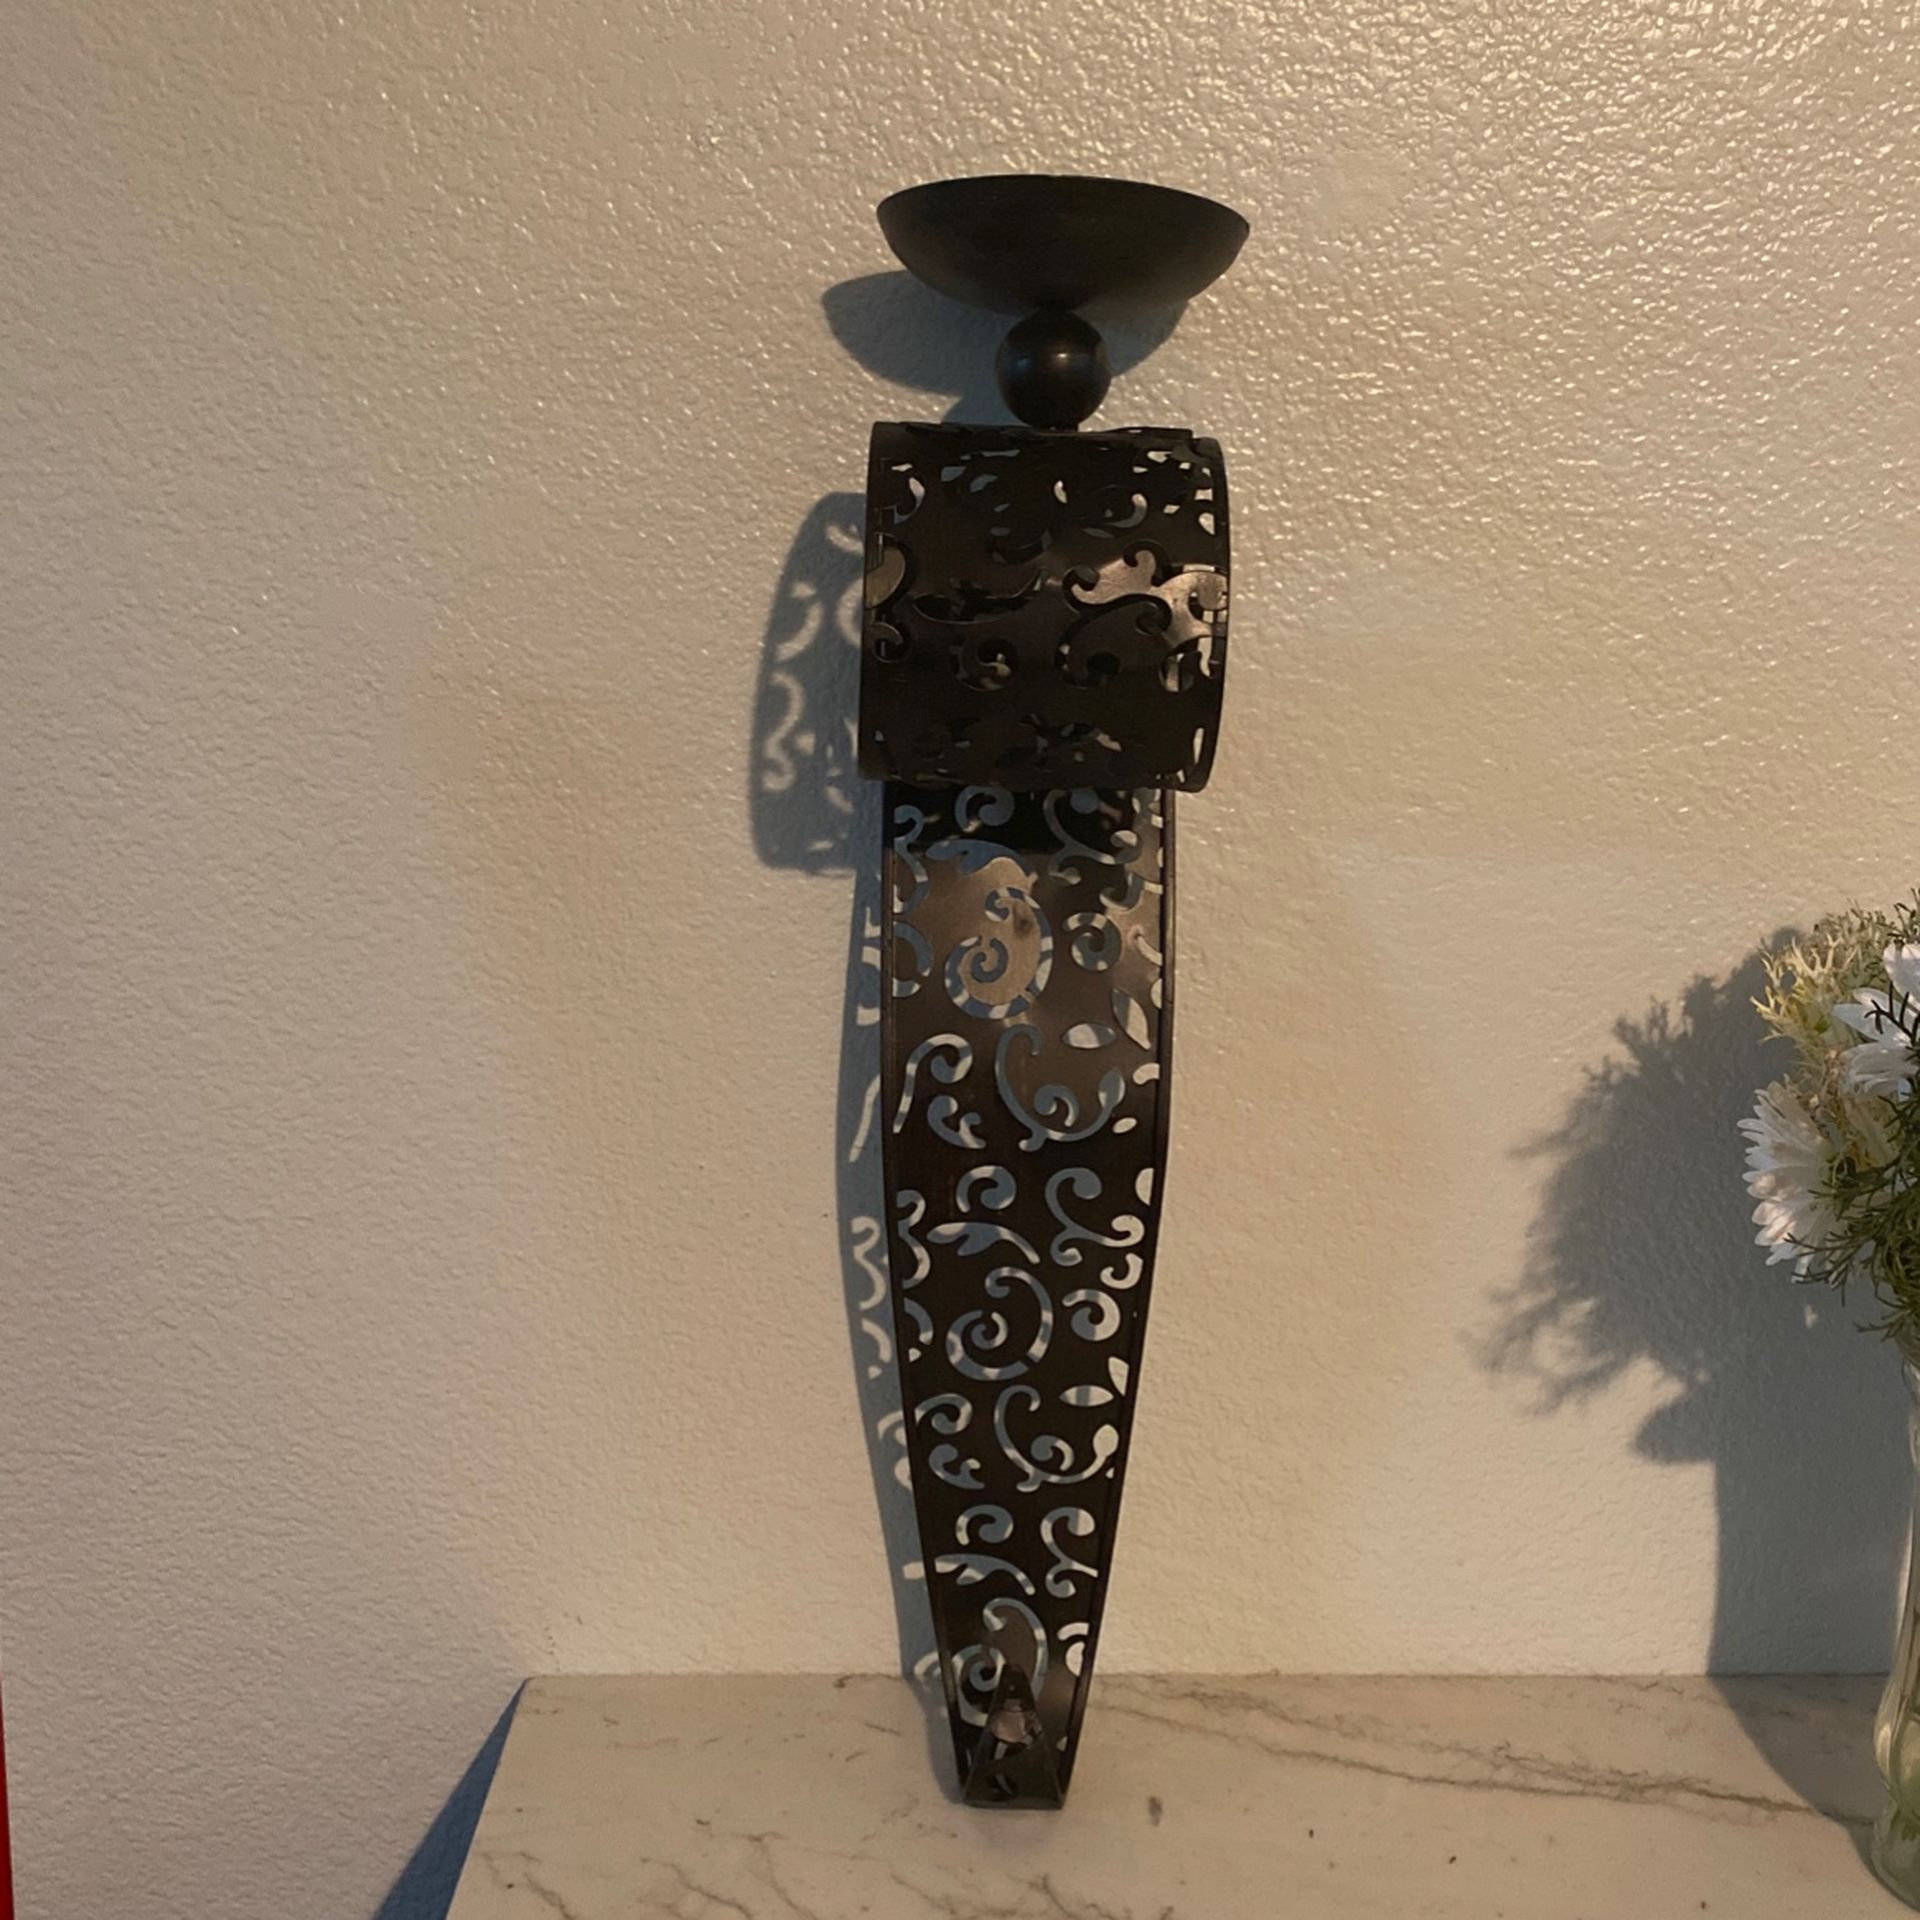 Candle Wall Holder For Sell From Pier 1 Imports, 2 For 50 Or Best Offer!